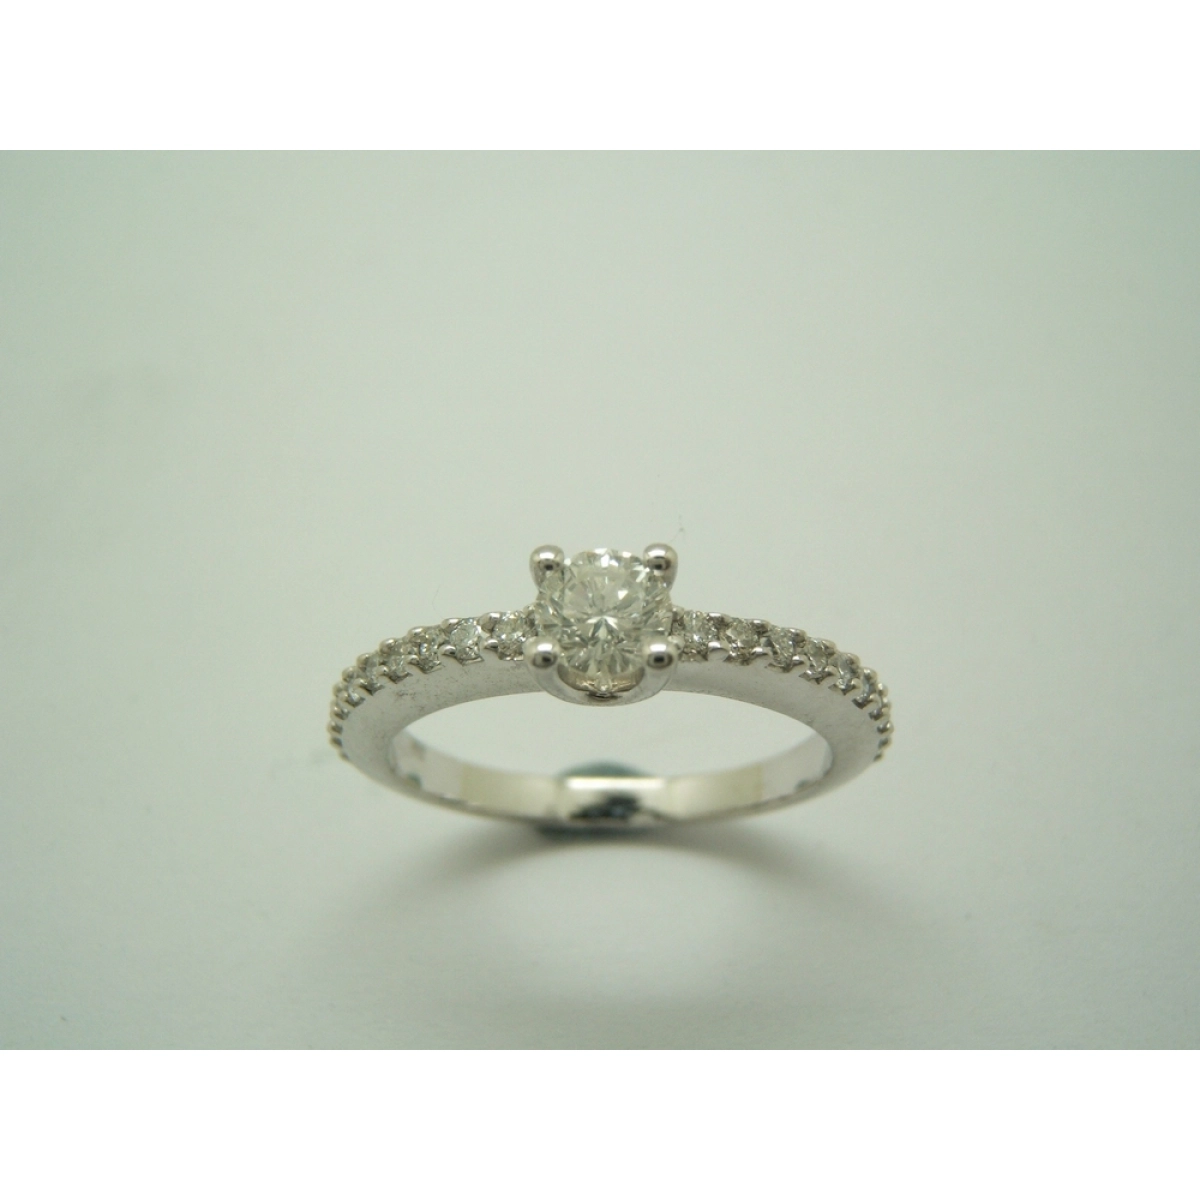 RING SOLITAIRE WHITE GOLD AND DIAMONDS B-79